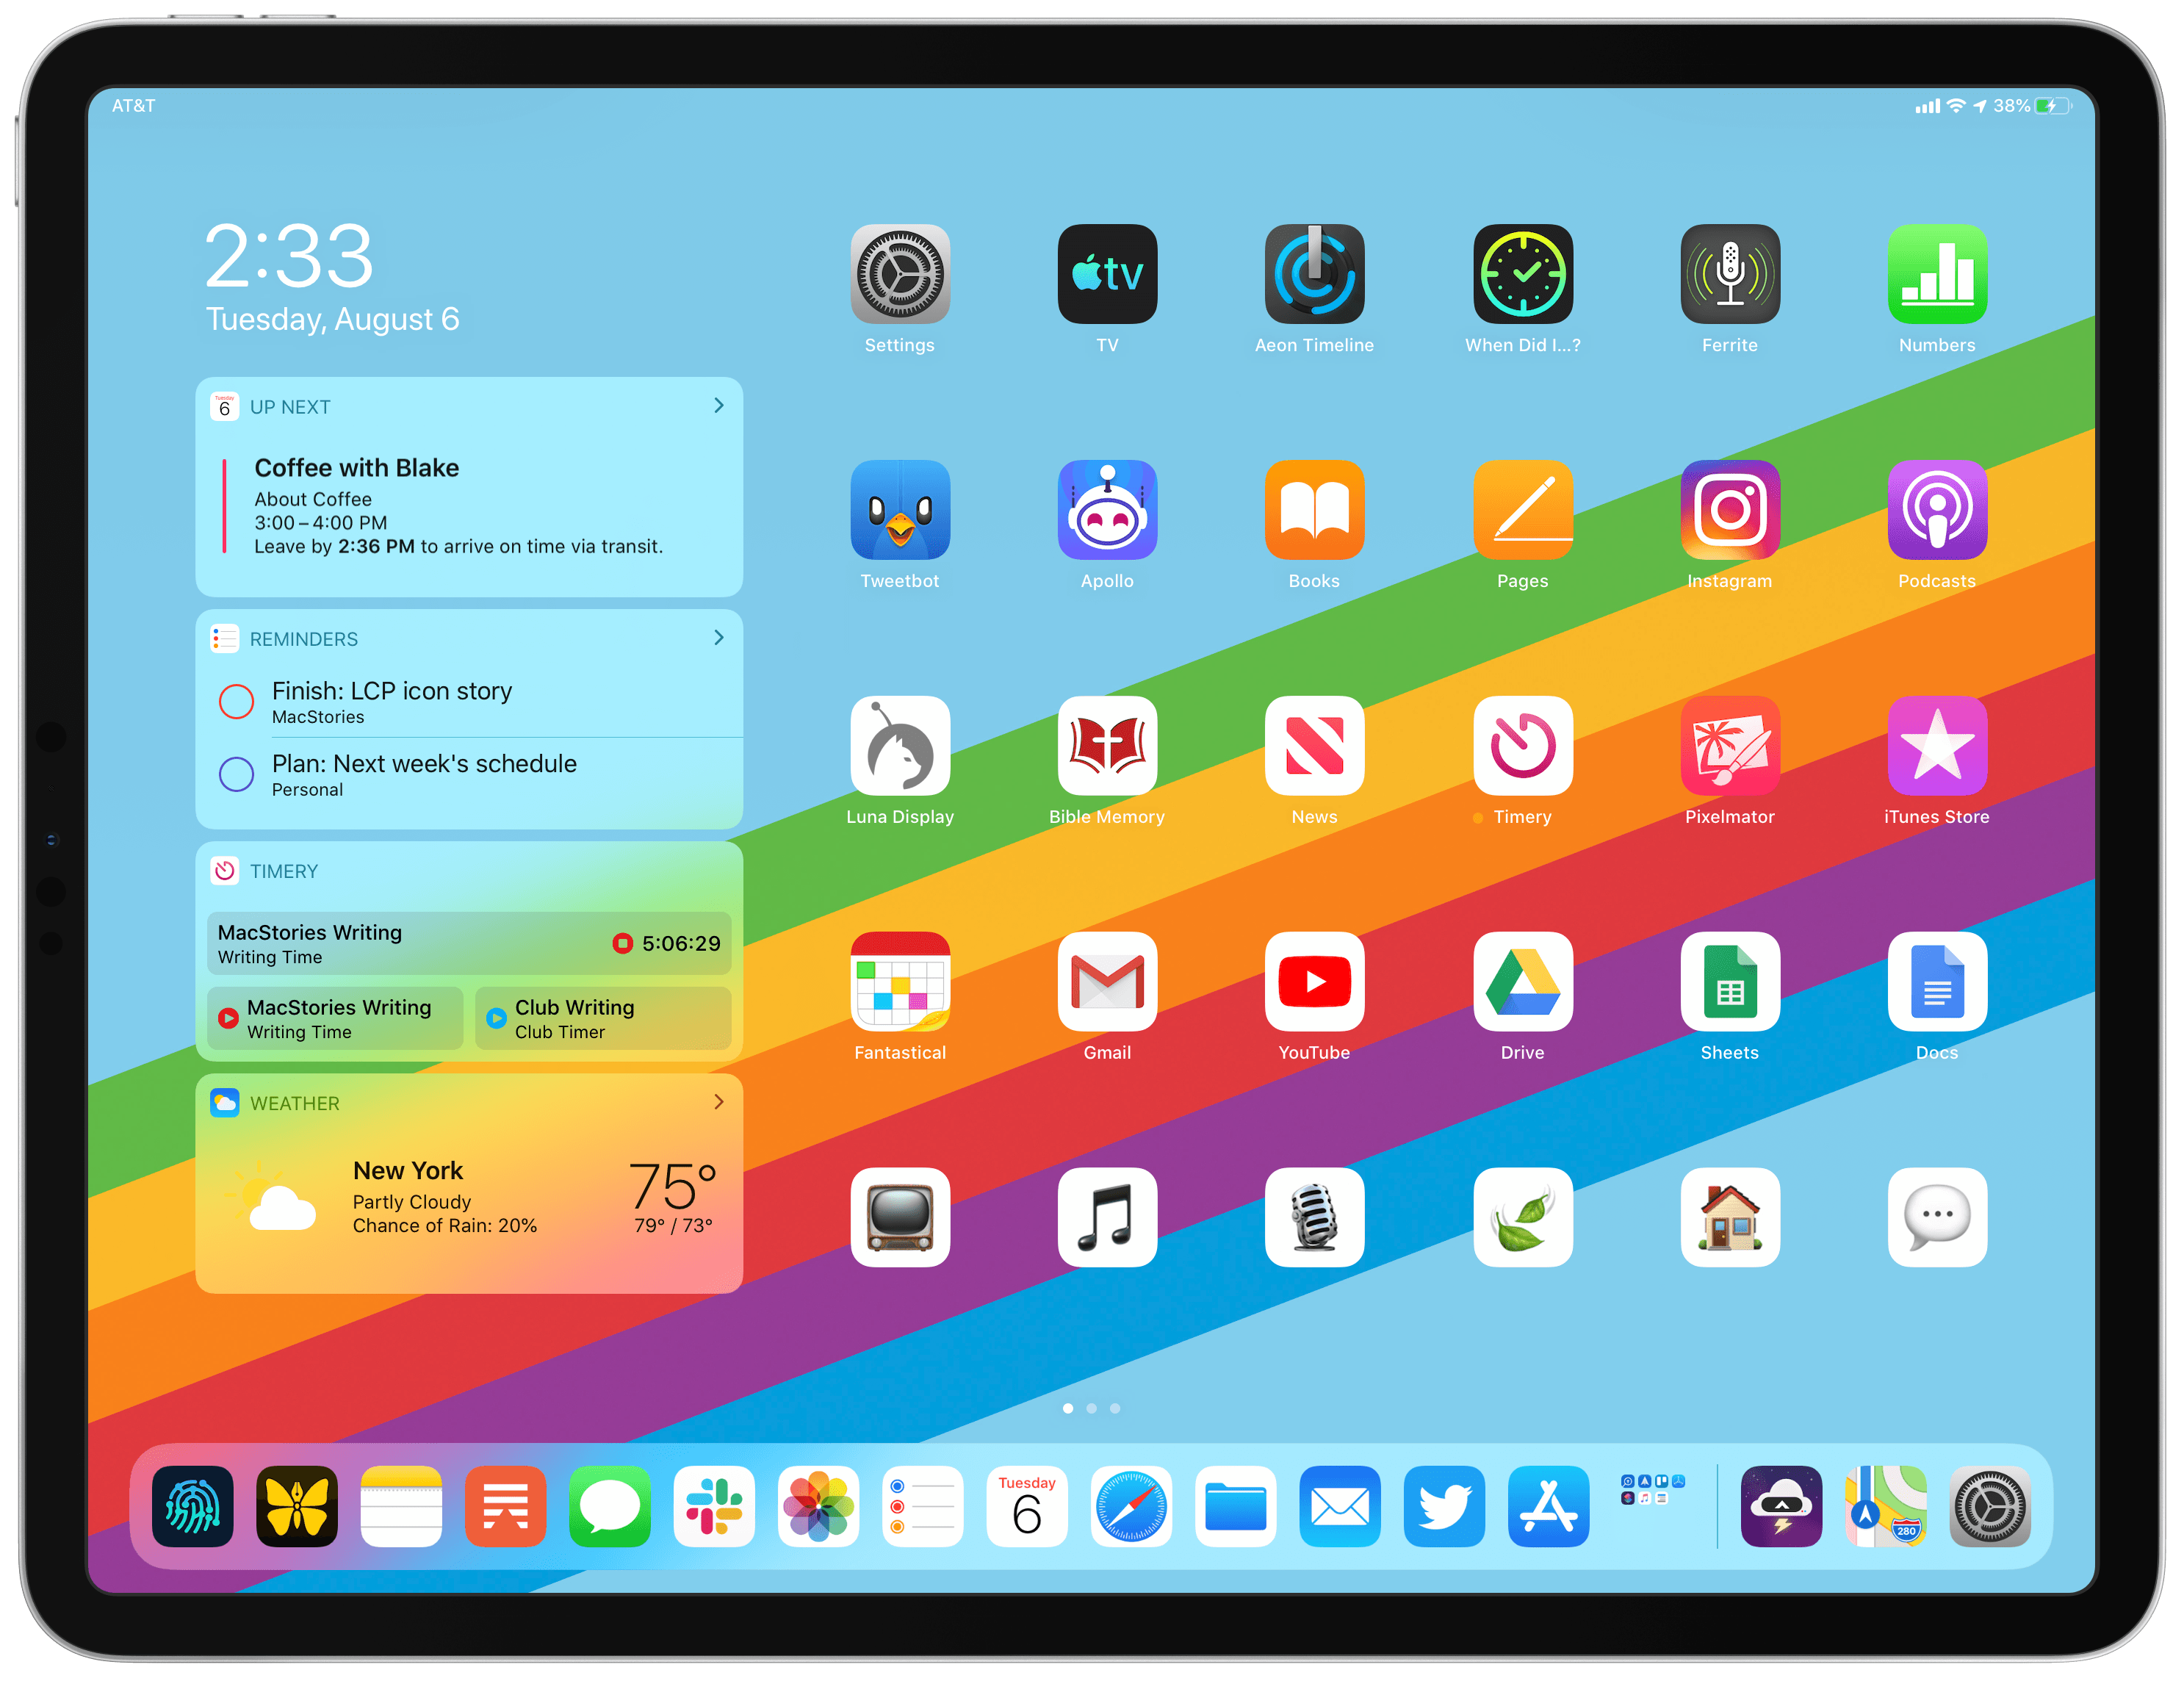 The bottom row contains some of my custom icons which launch shortcuts.